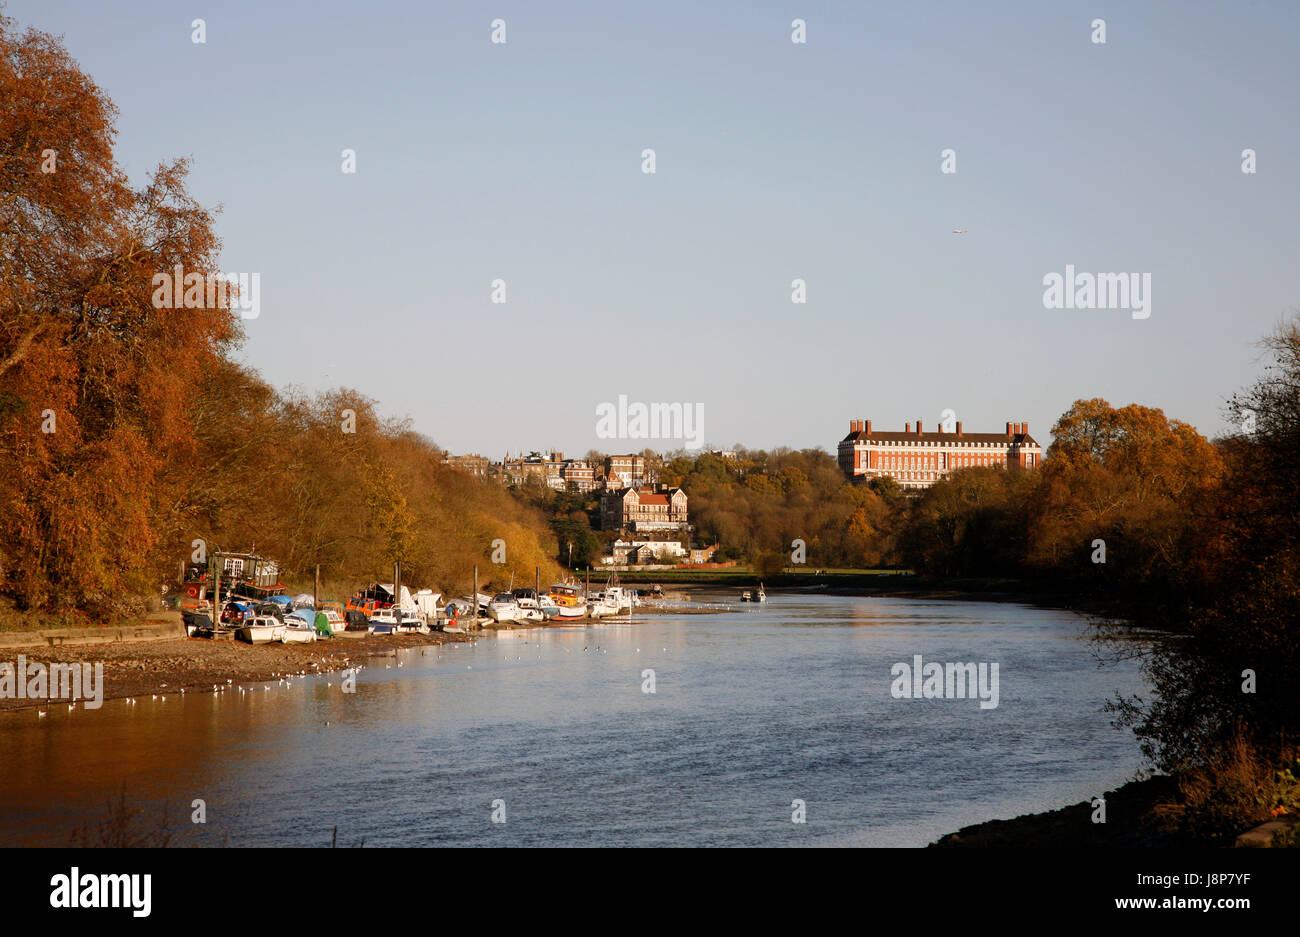 winter, europe, london, england, country, landscape, scenery, countryside, Stock Photo